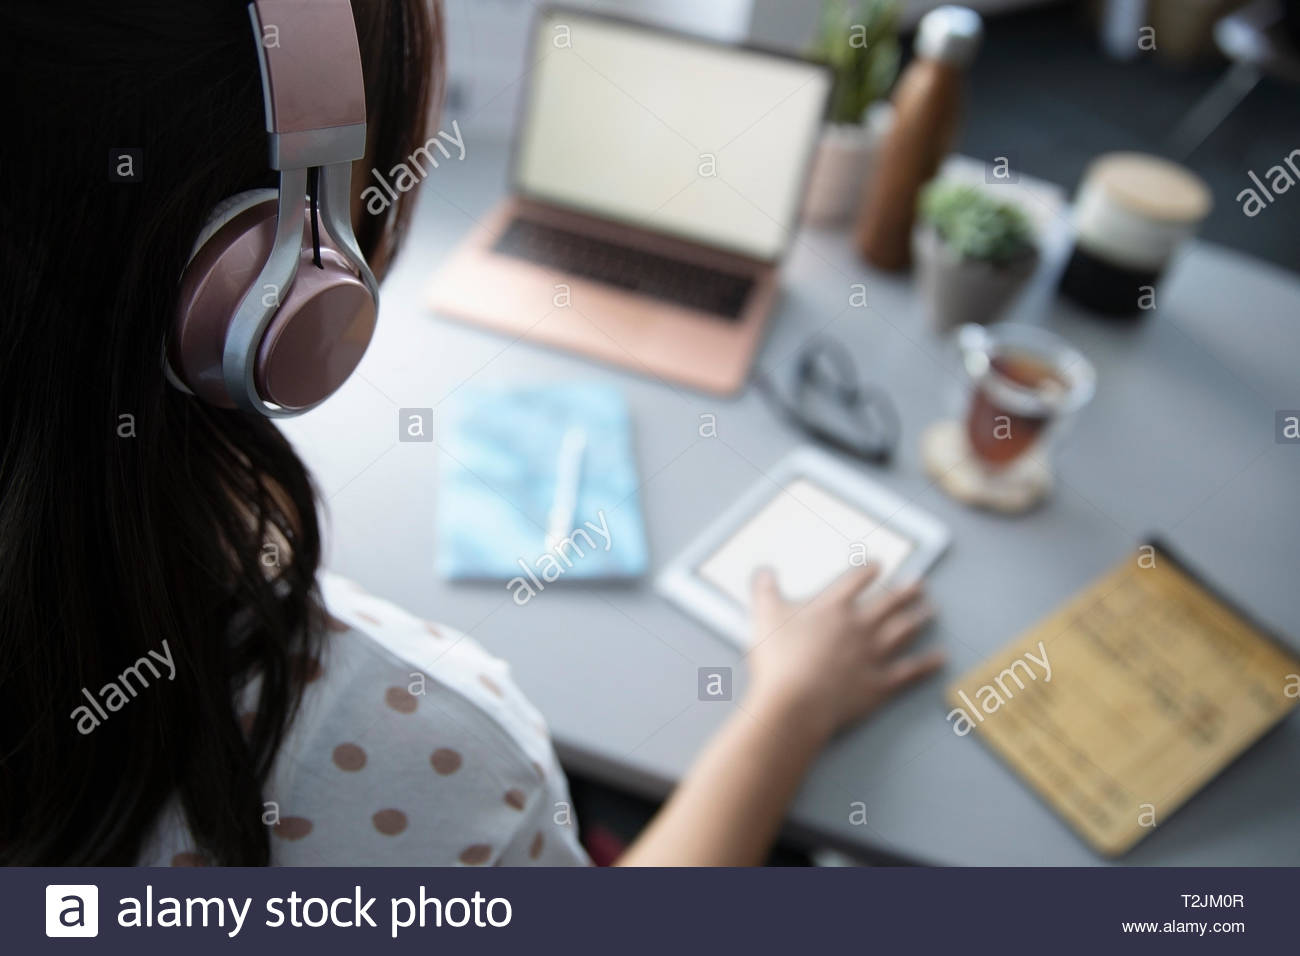 Woman with headphones using digital tablet at desk Banque D'Images